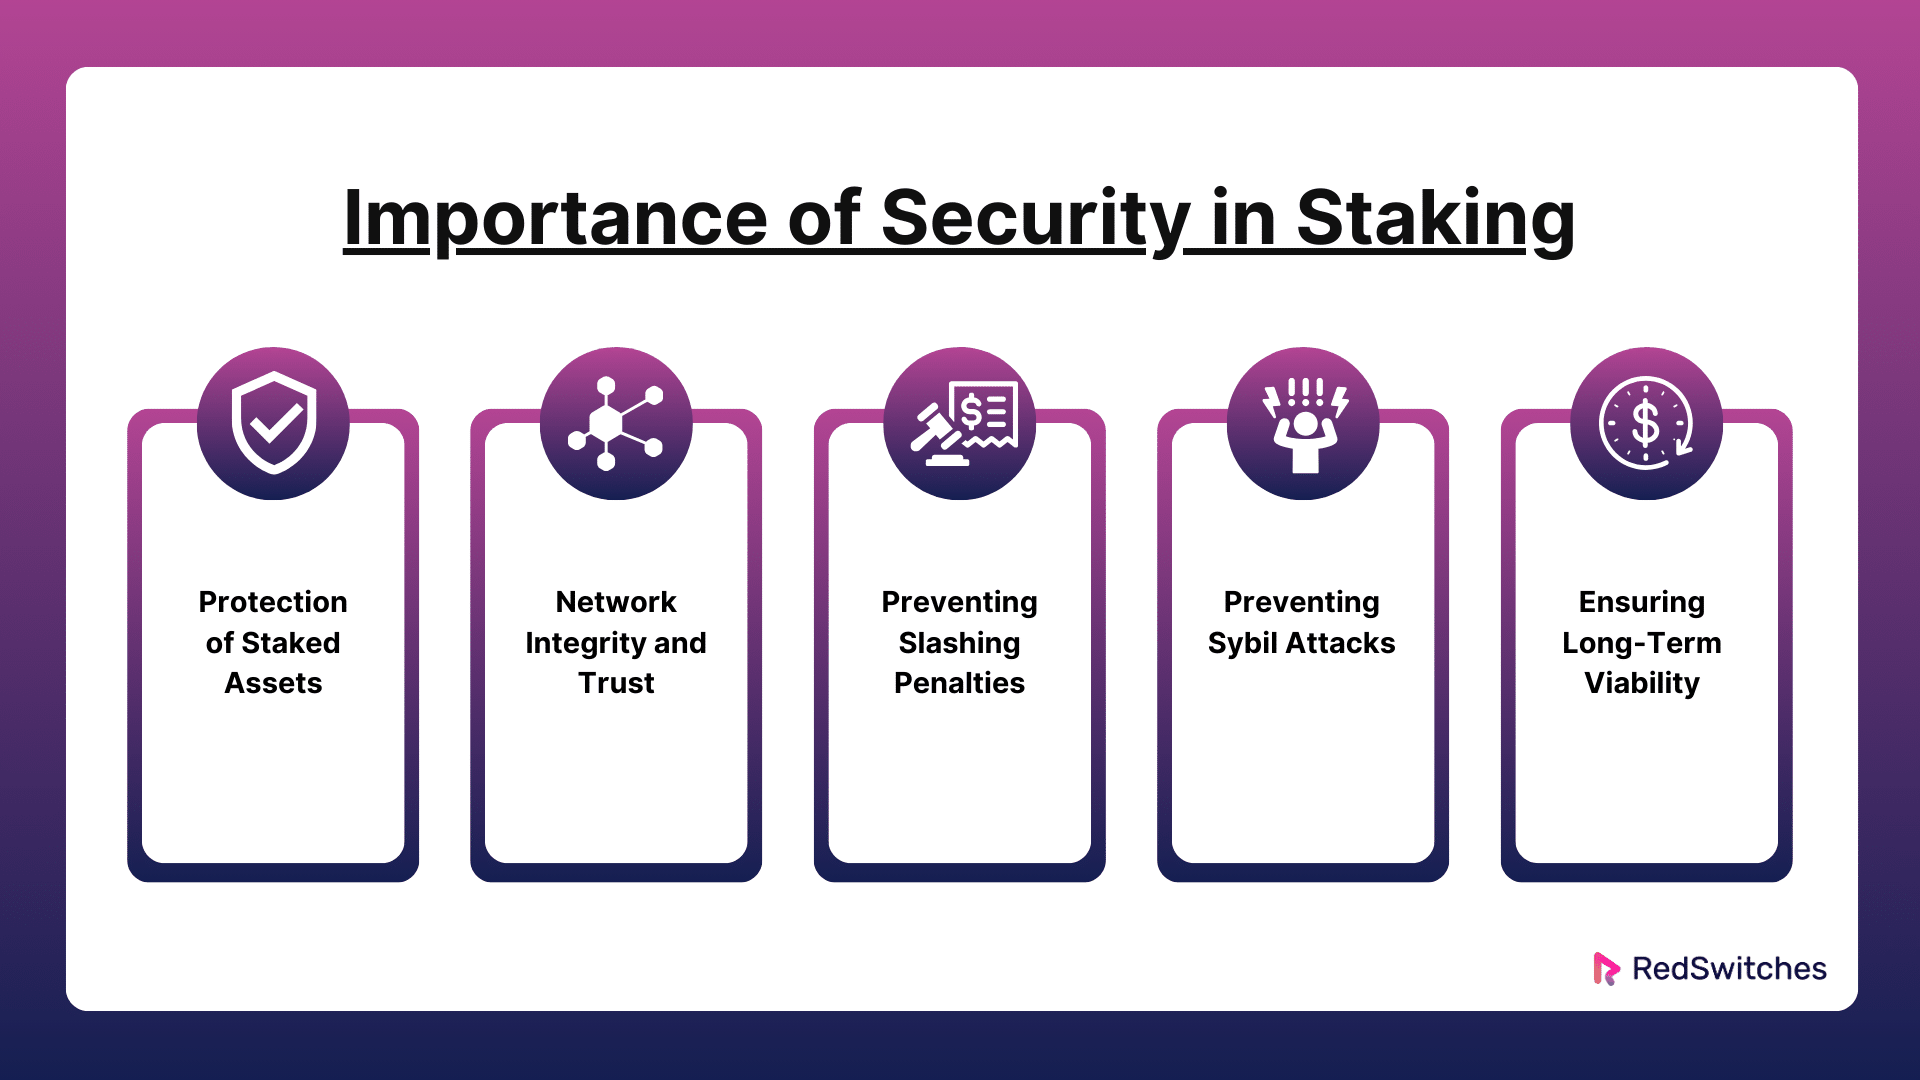 Importance of Security in Staking